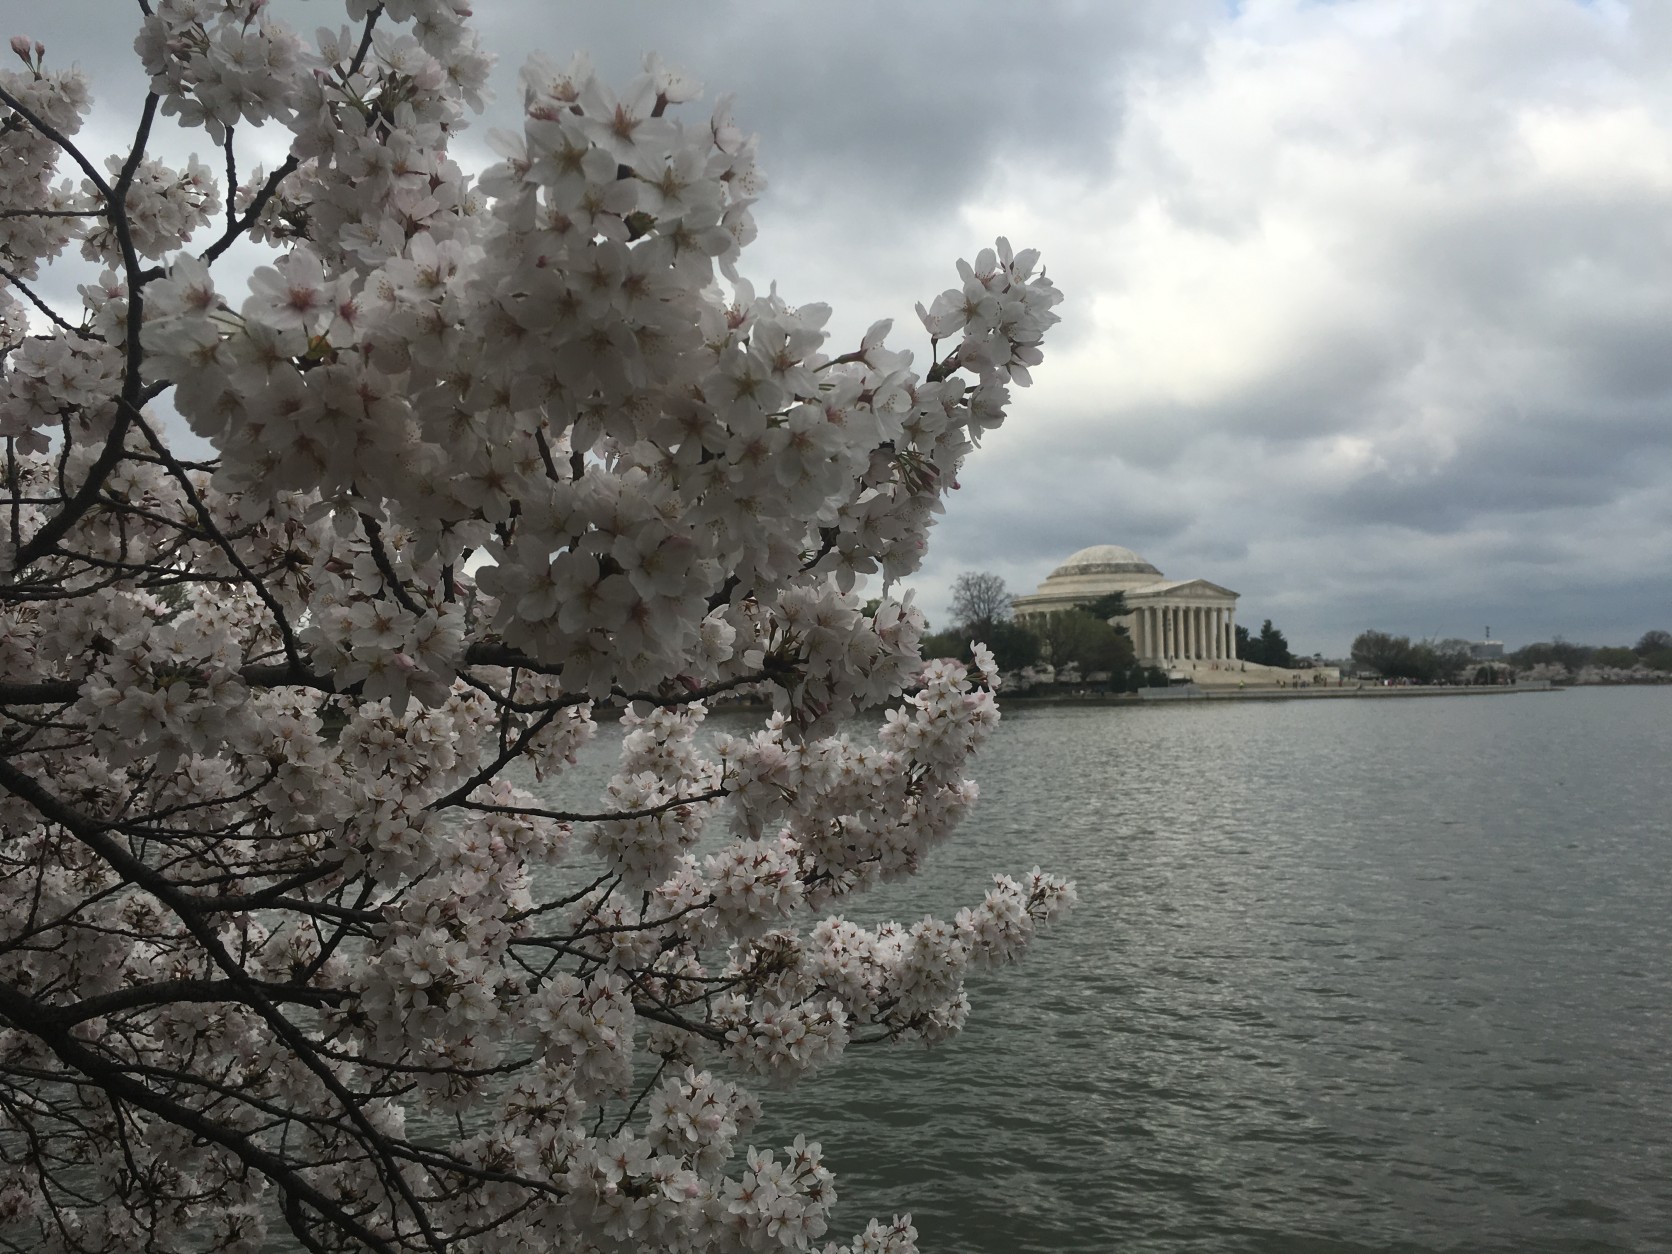 The view from the Tidal Basin shortly before 10 a.m. March 25, 2016. (WTOP/Rahul Bali)